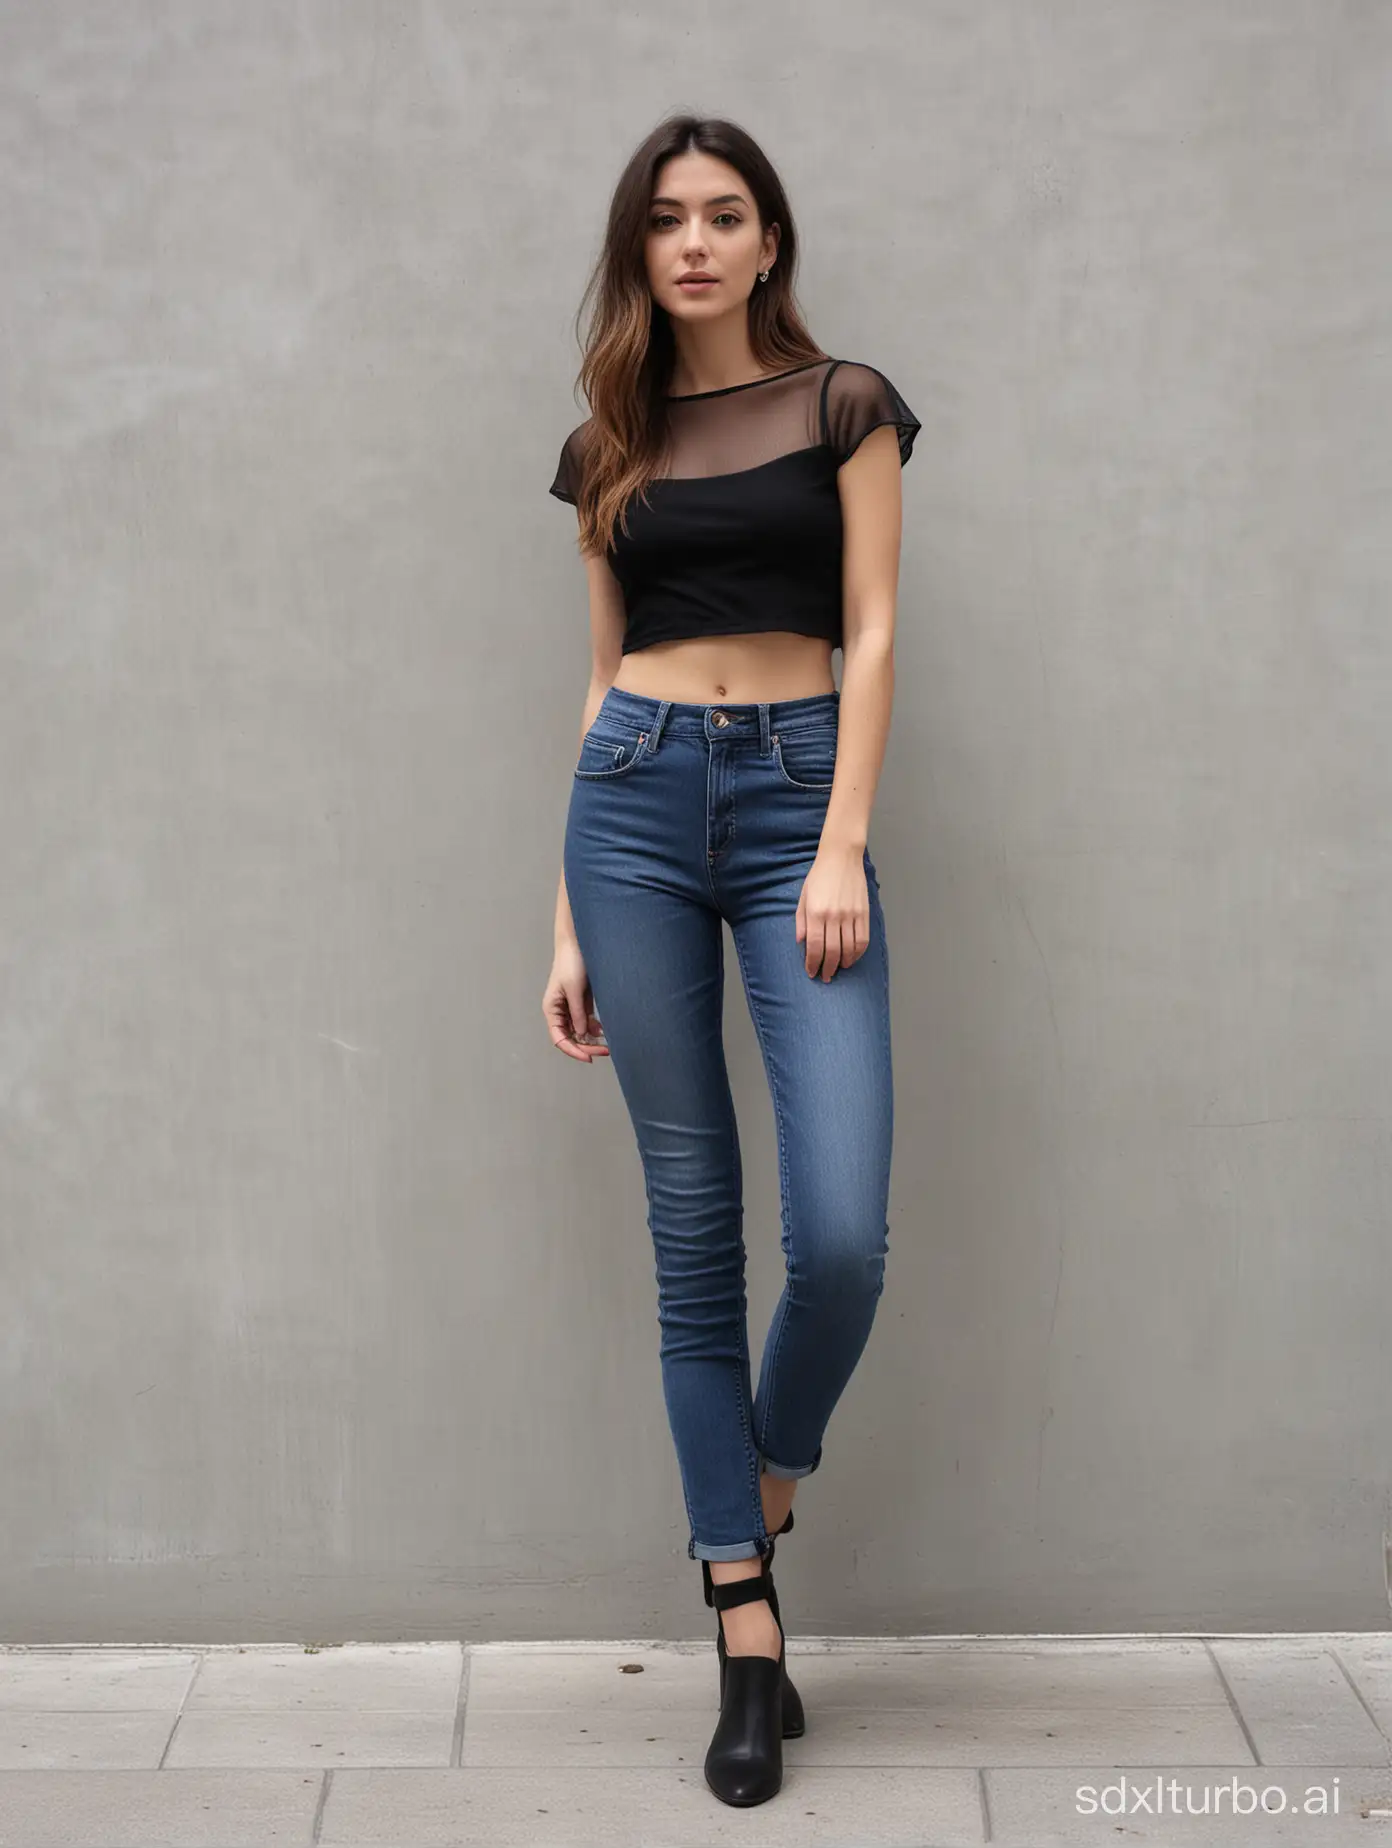 Stylish-Full-Body-Portrait-in-Casual-Skinny-Jeans-and-Black-Mesh-Crop-Top